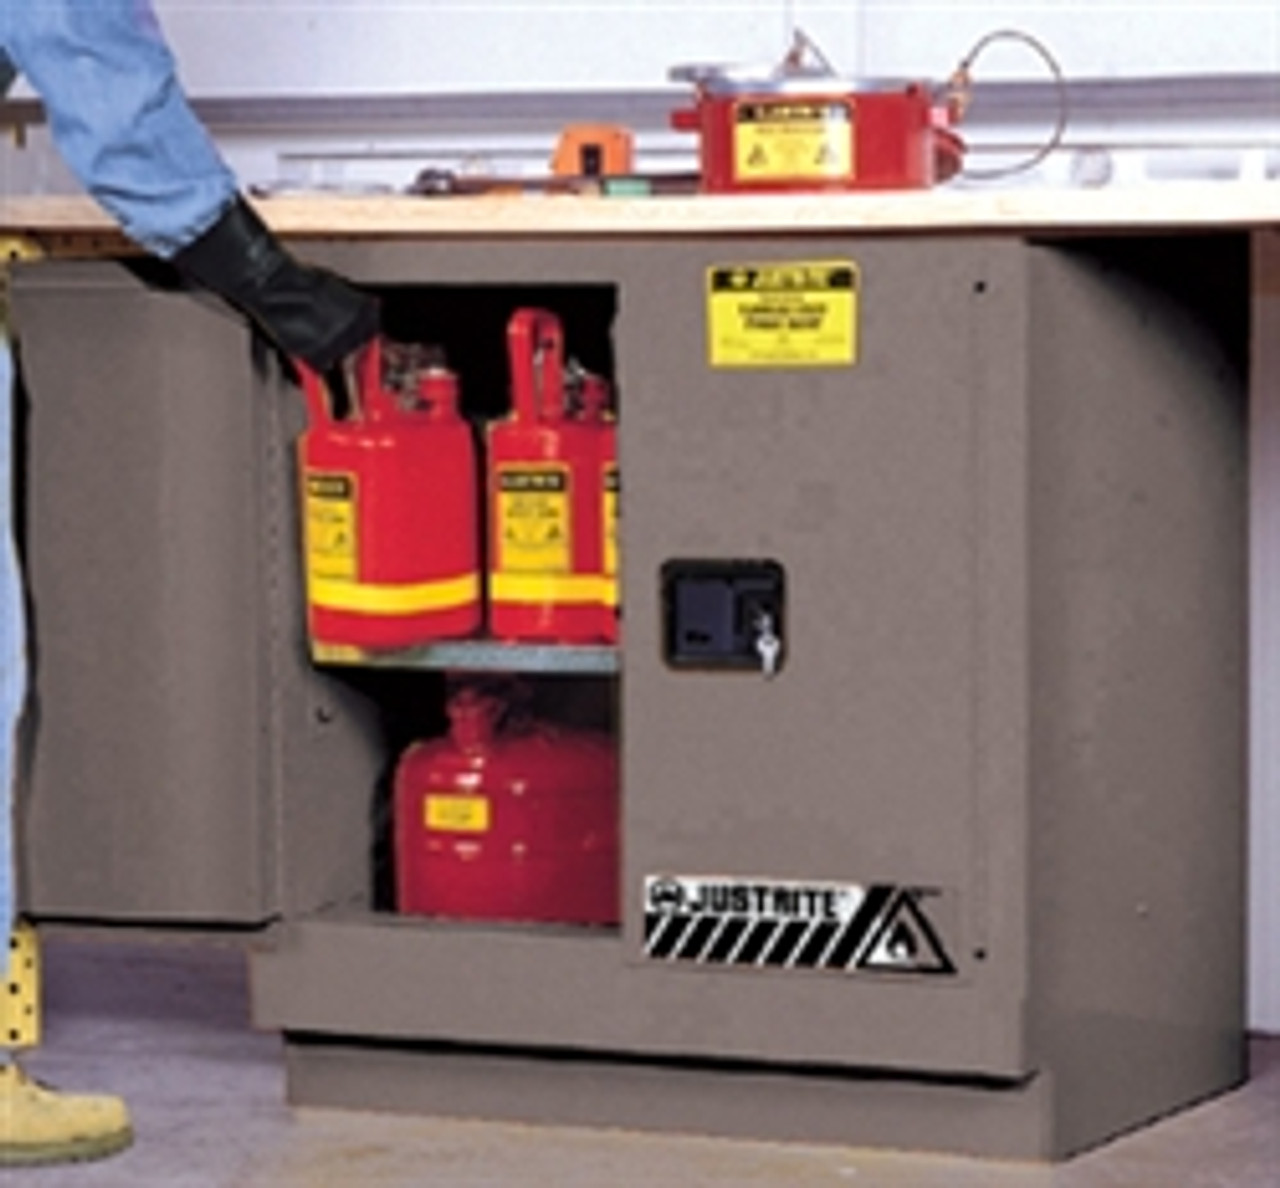 22 Gal Yellow Flammable Cabinet, Under Counter, 2 Self-Close Doors, 892320